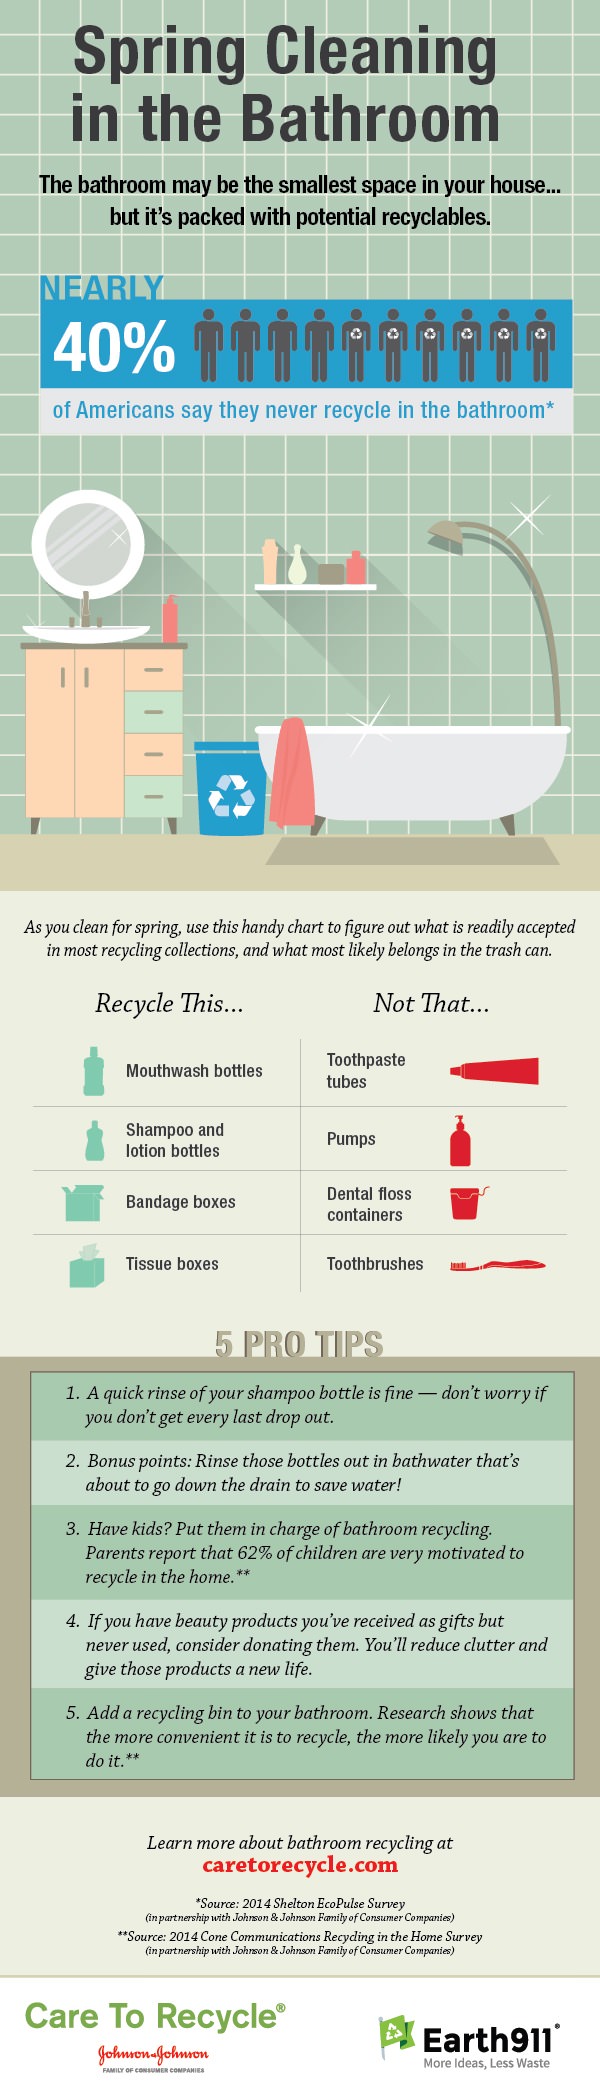 Spring Cleaning Infographic